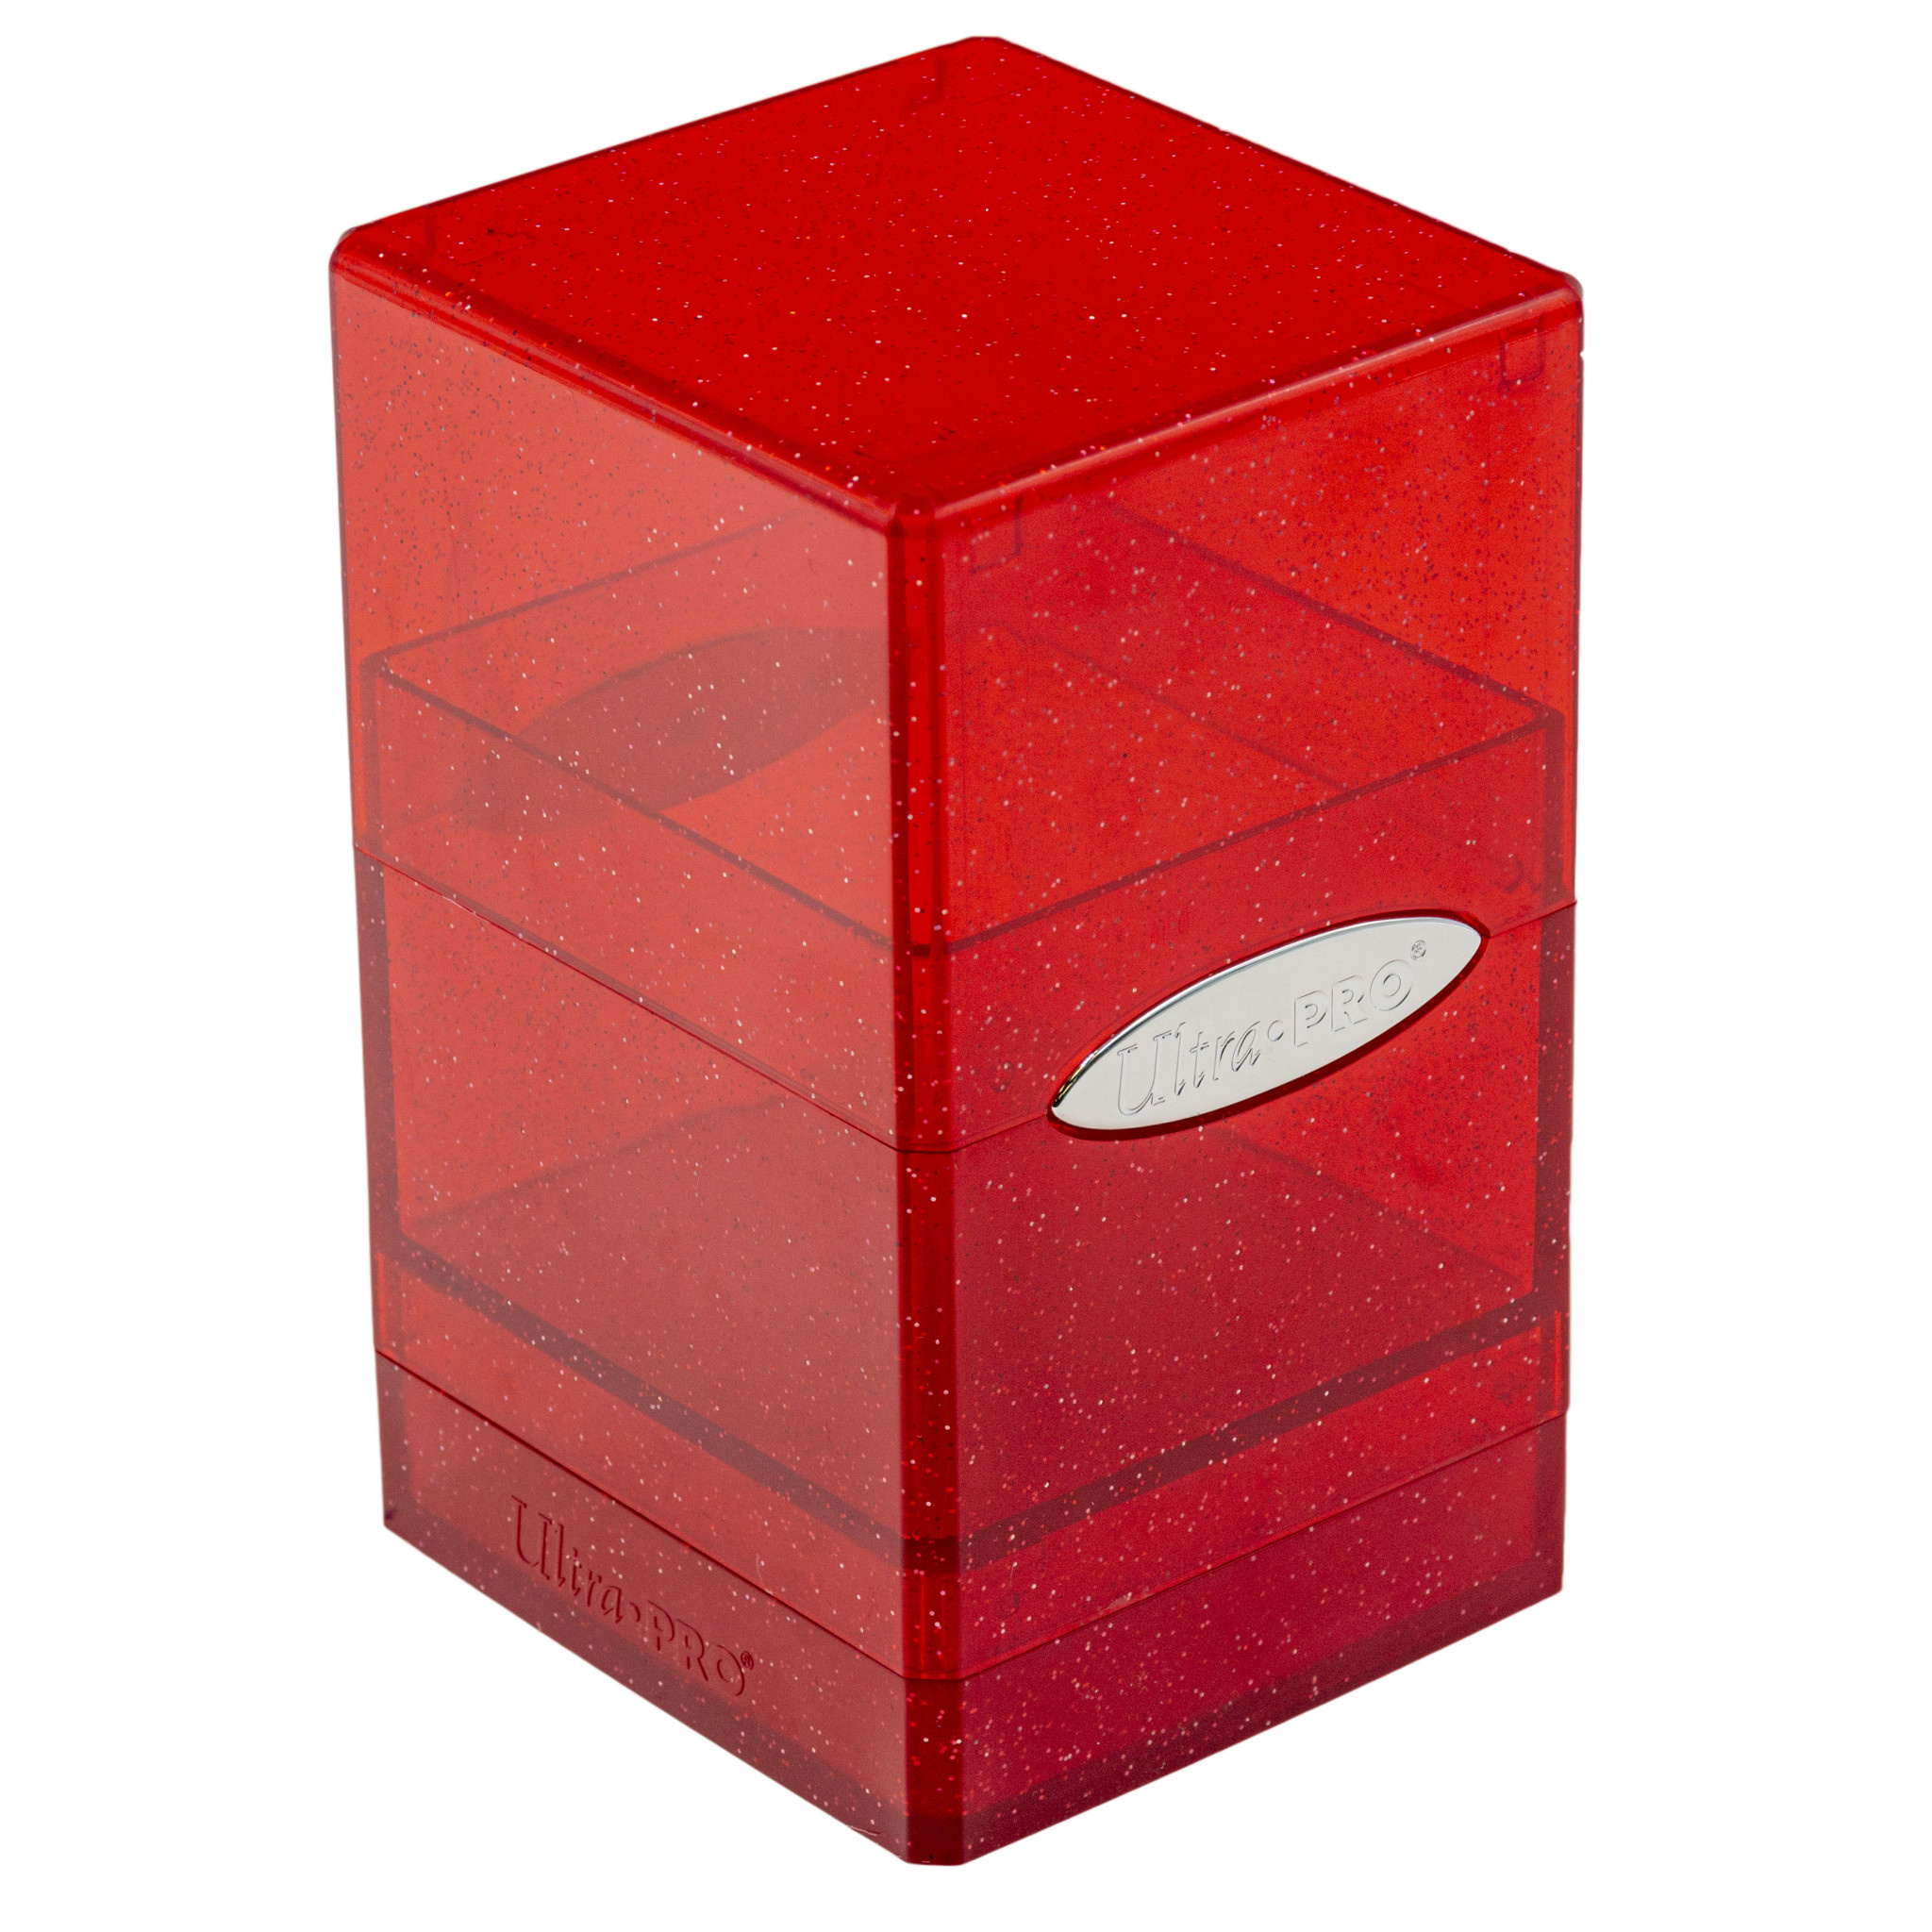 UP Deck Box: Satin Tower - Glitter Red